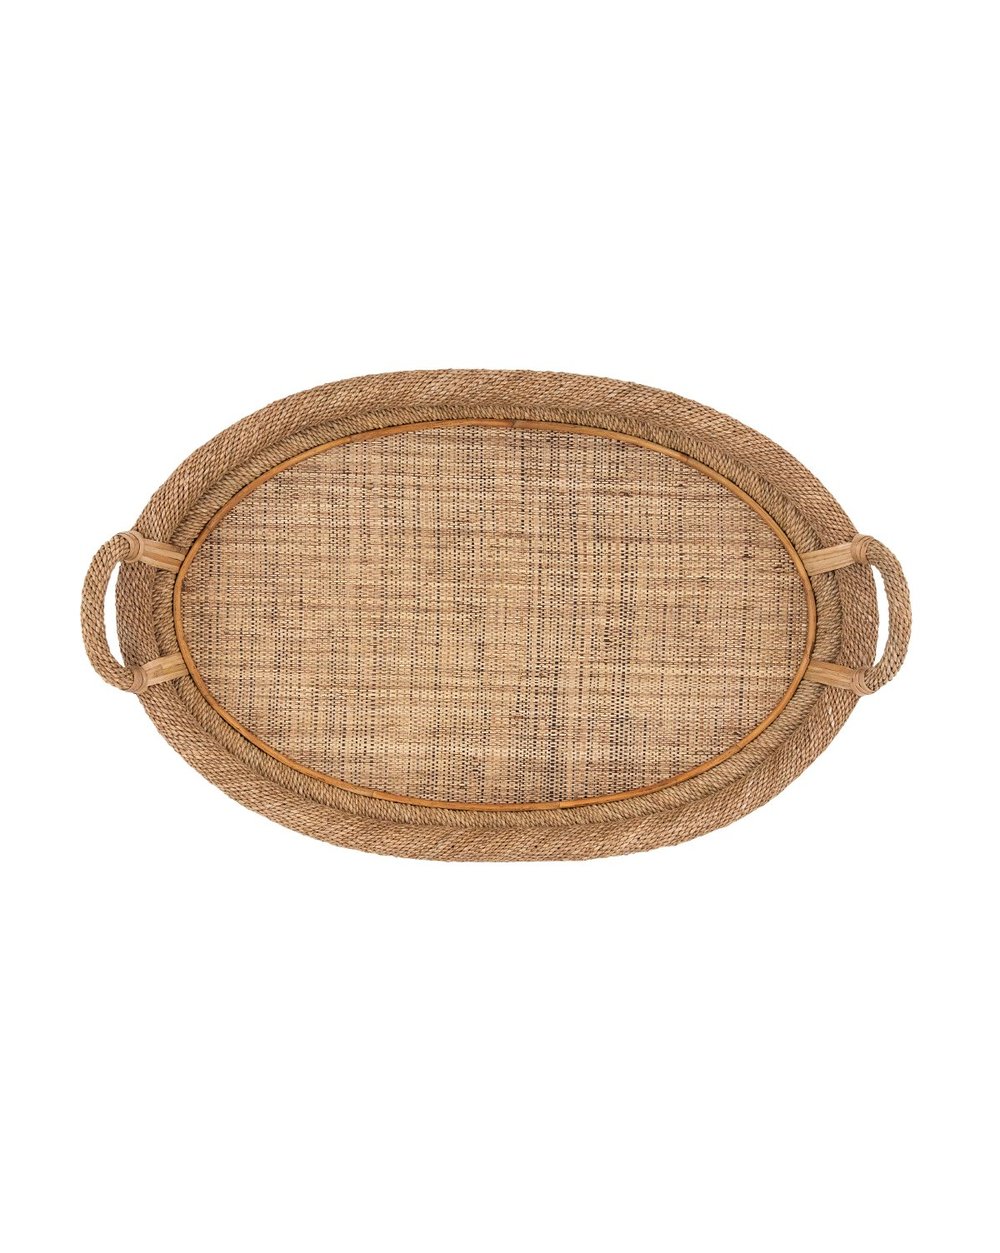 Cane_Rope_Oval_Tray1.jpg